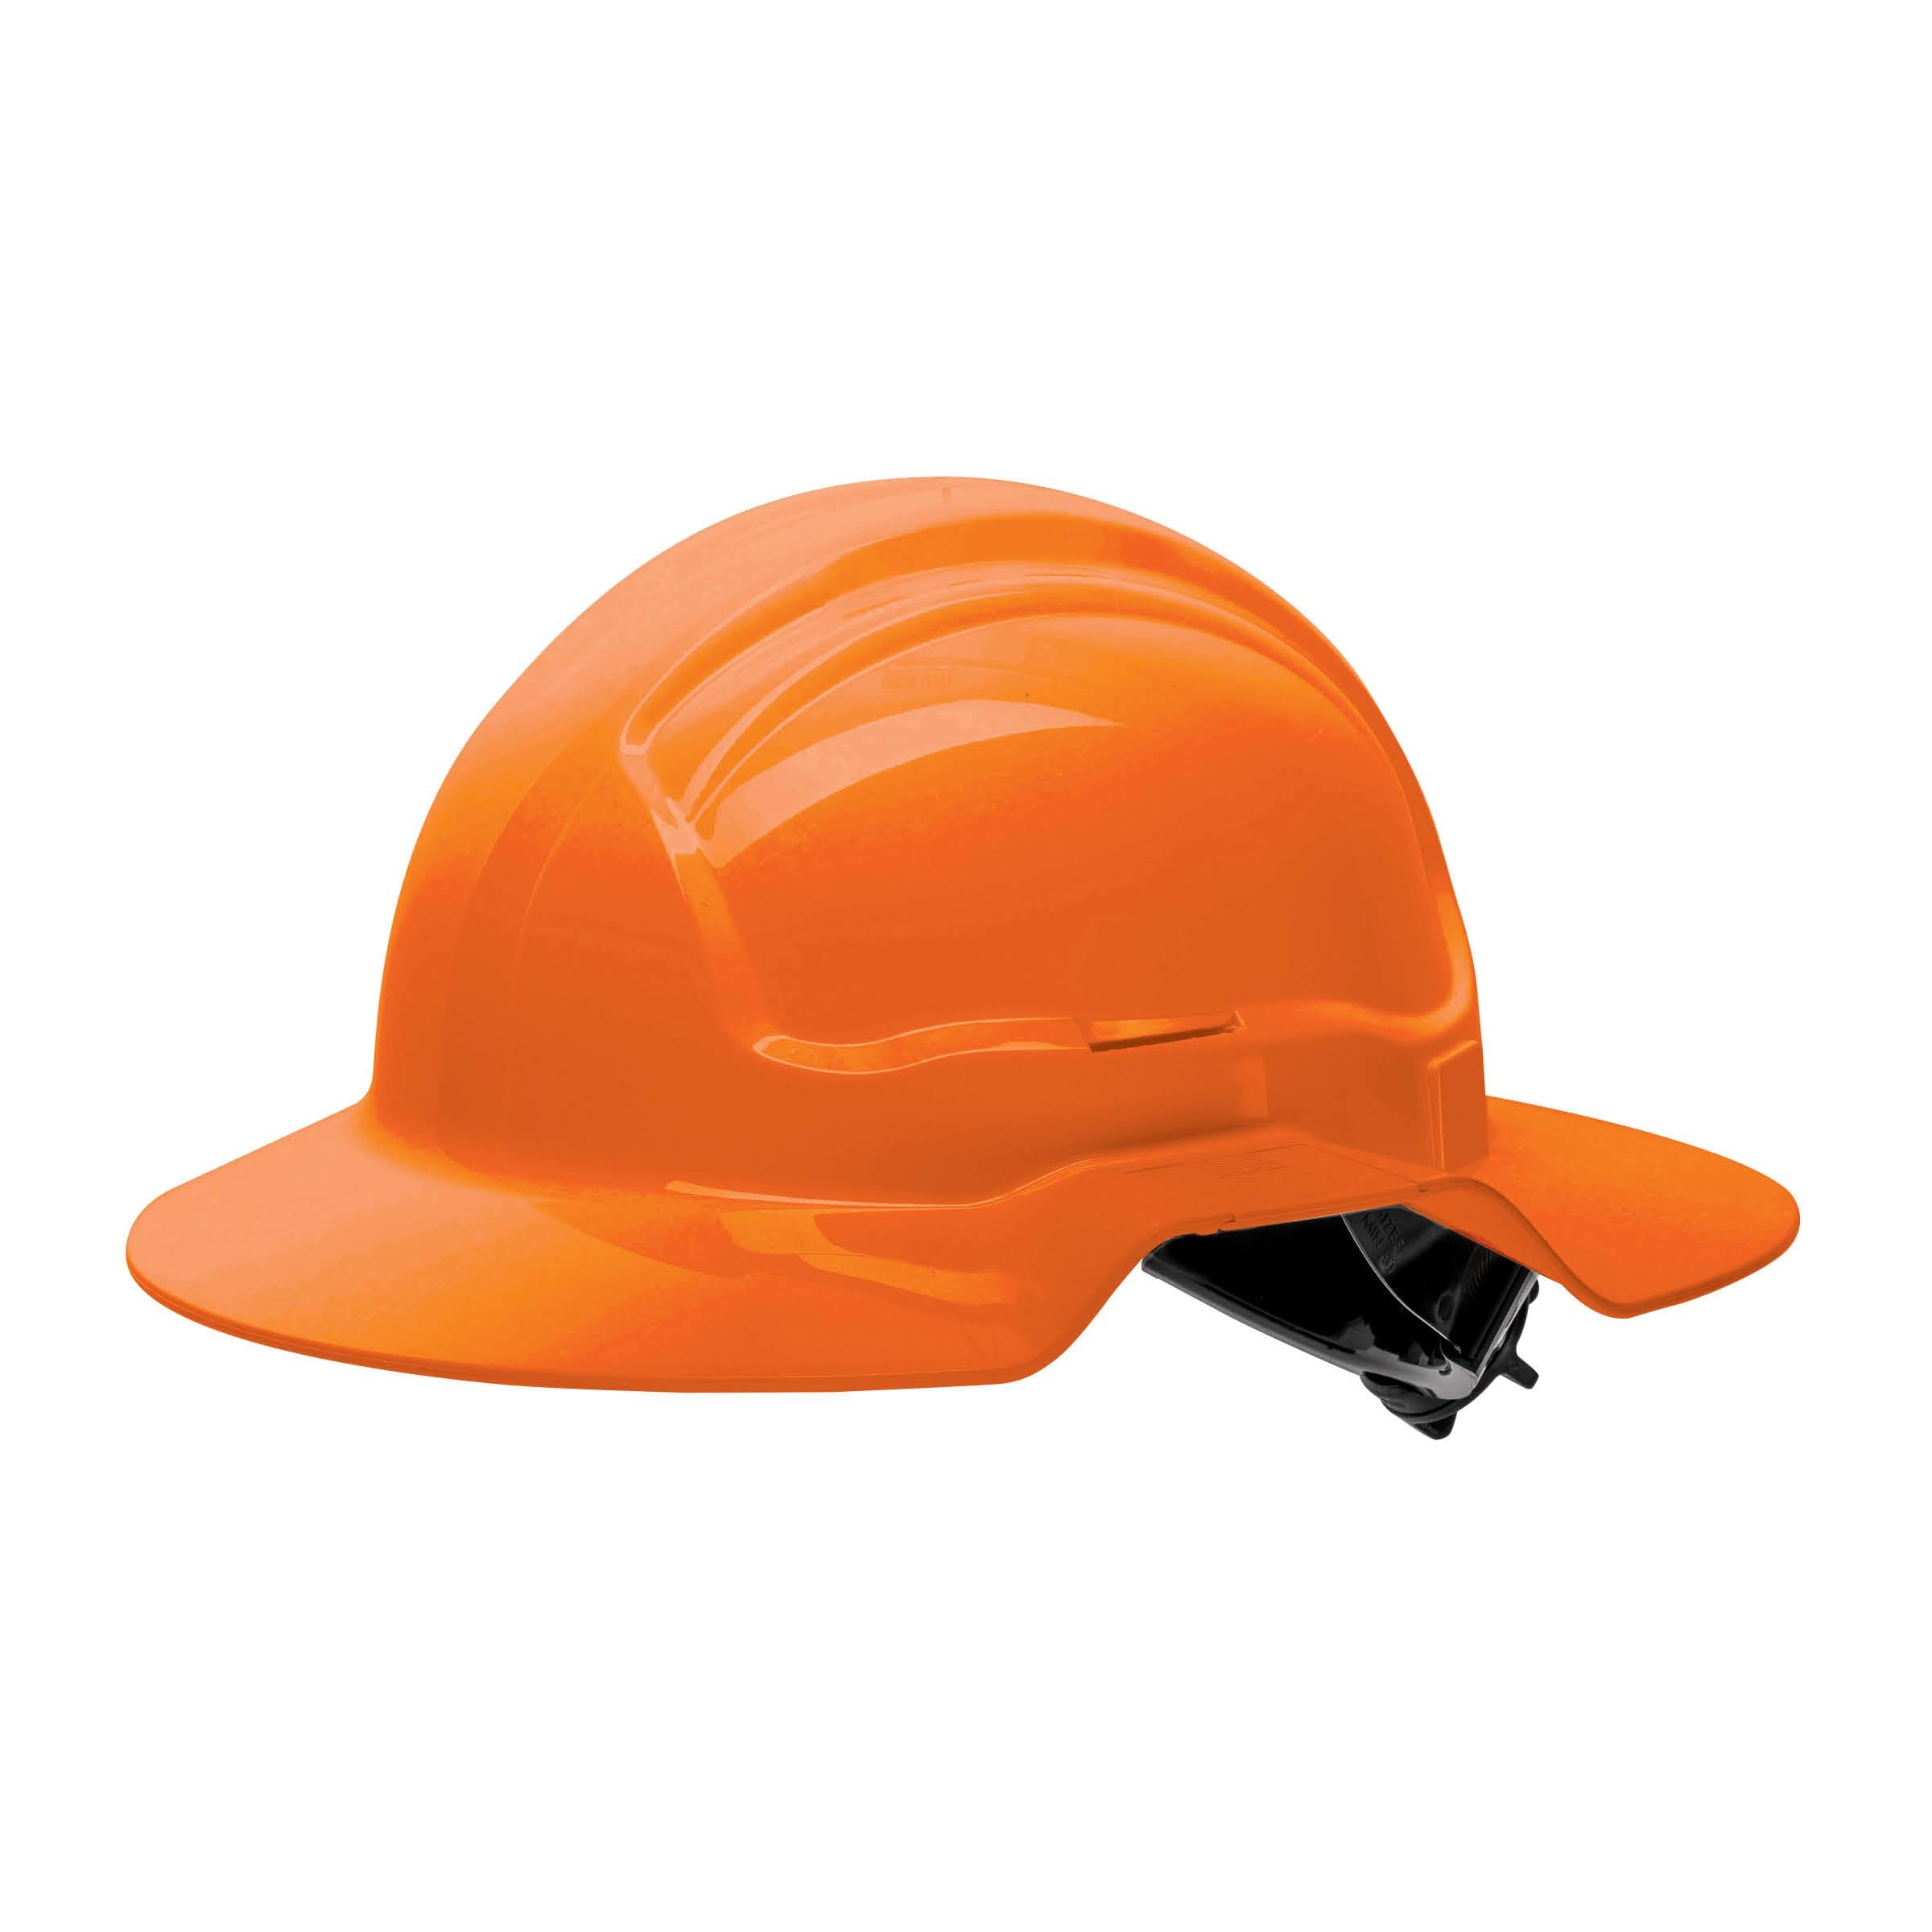 Force360 HPFPRBB56R Broad Brim Hard Hat, Non-Vented, 6 Point Ratchet Harness, Type 1